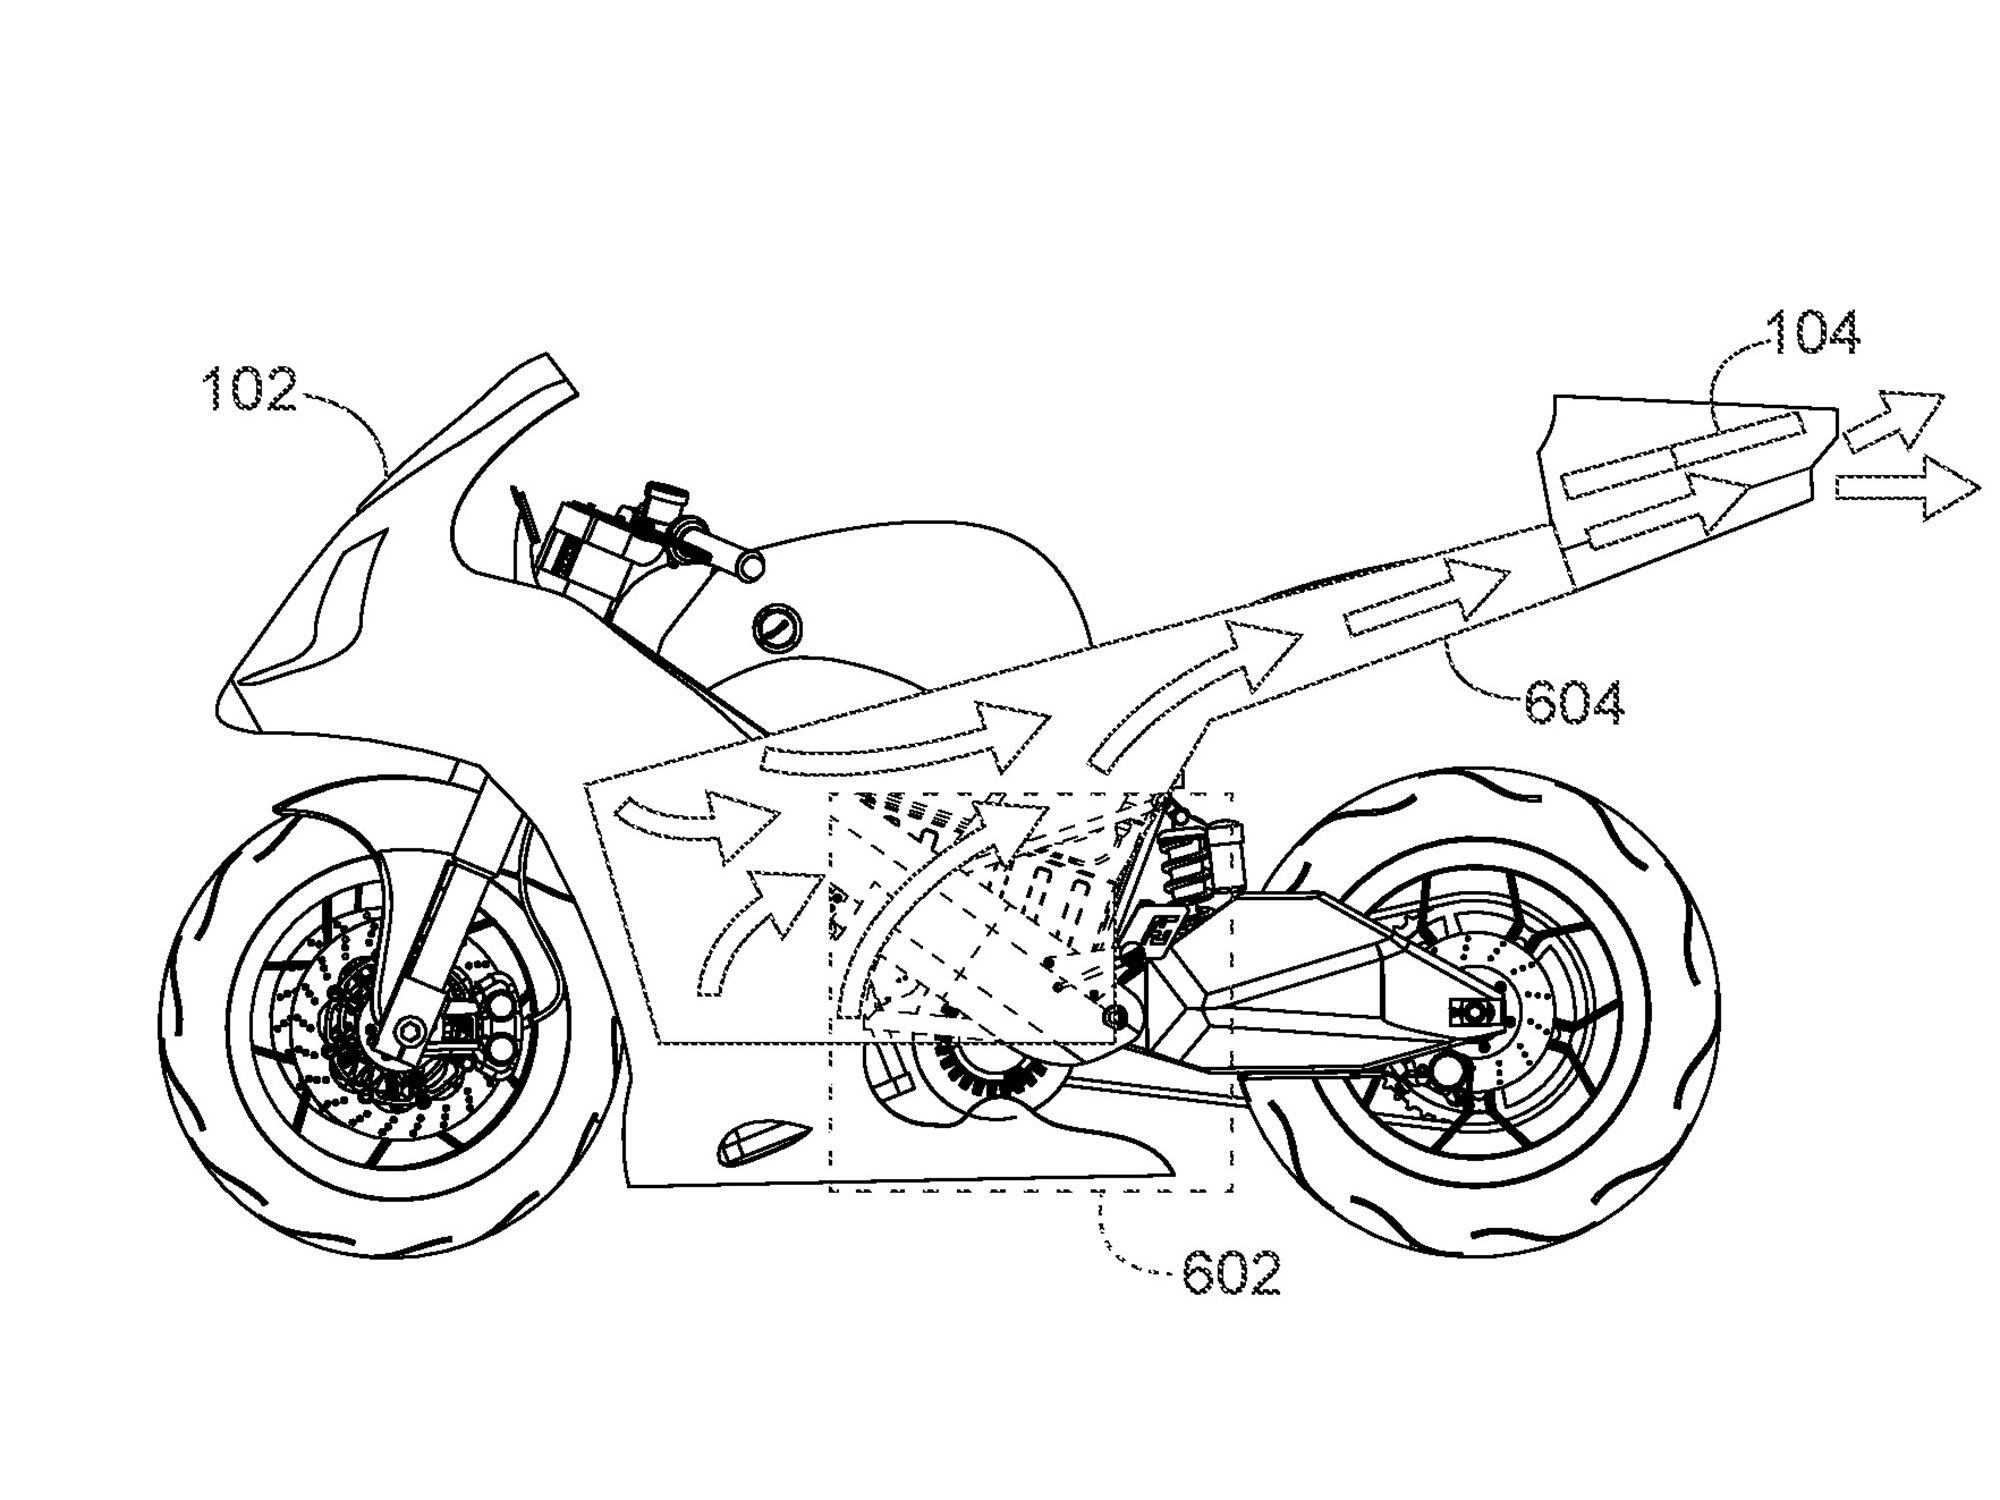 According to the patent, the drone will be housed in the motorcycle’s tail.